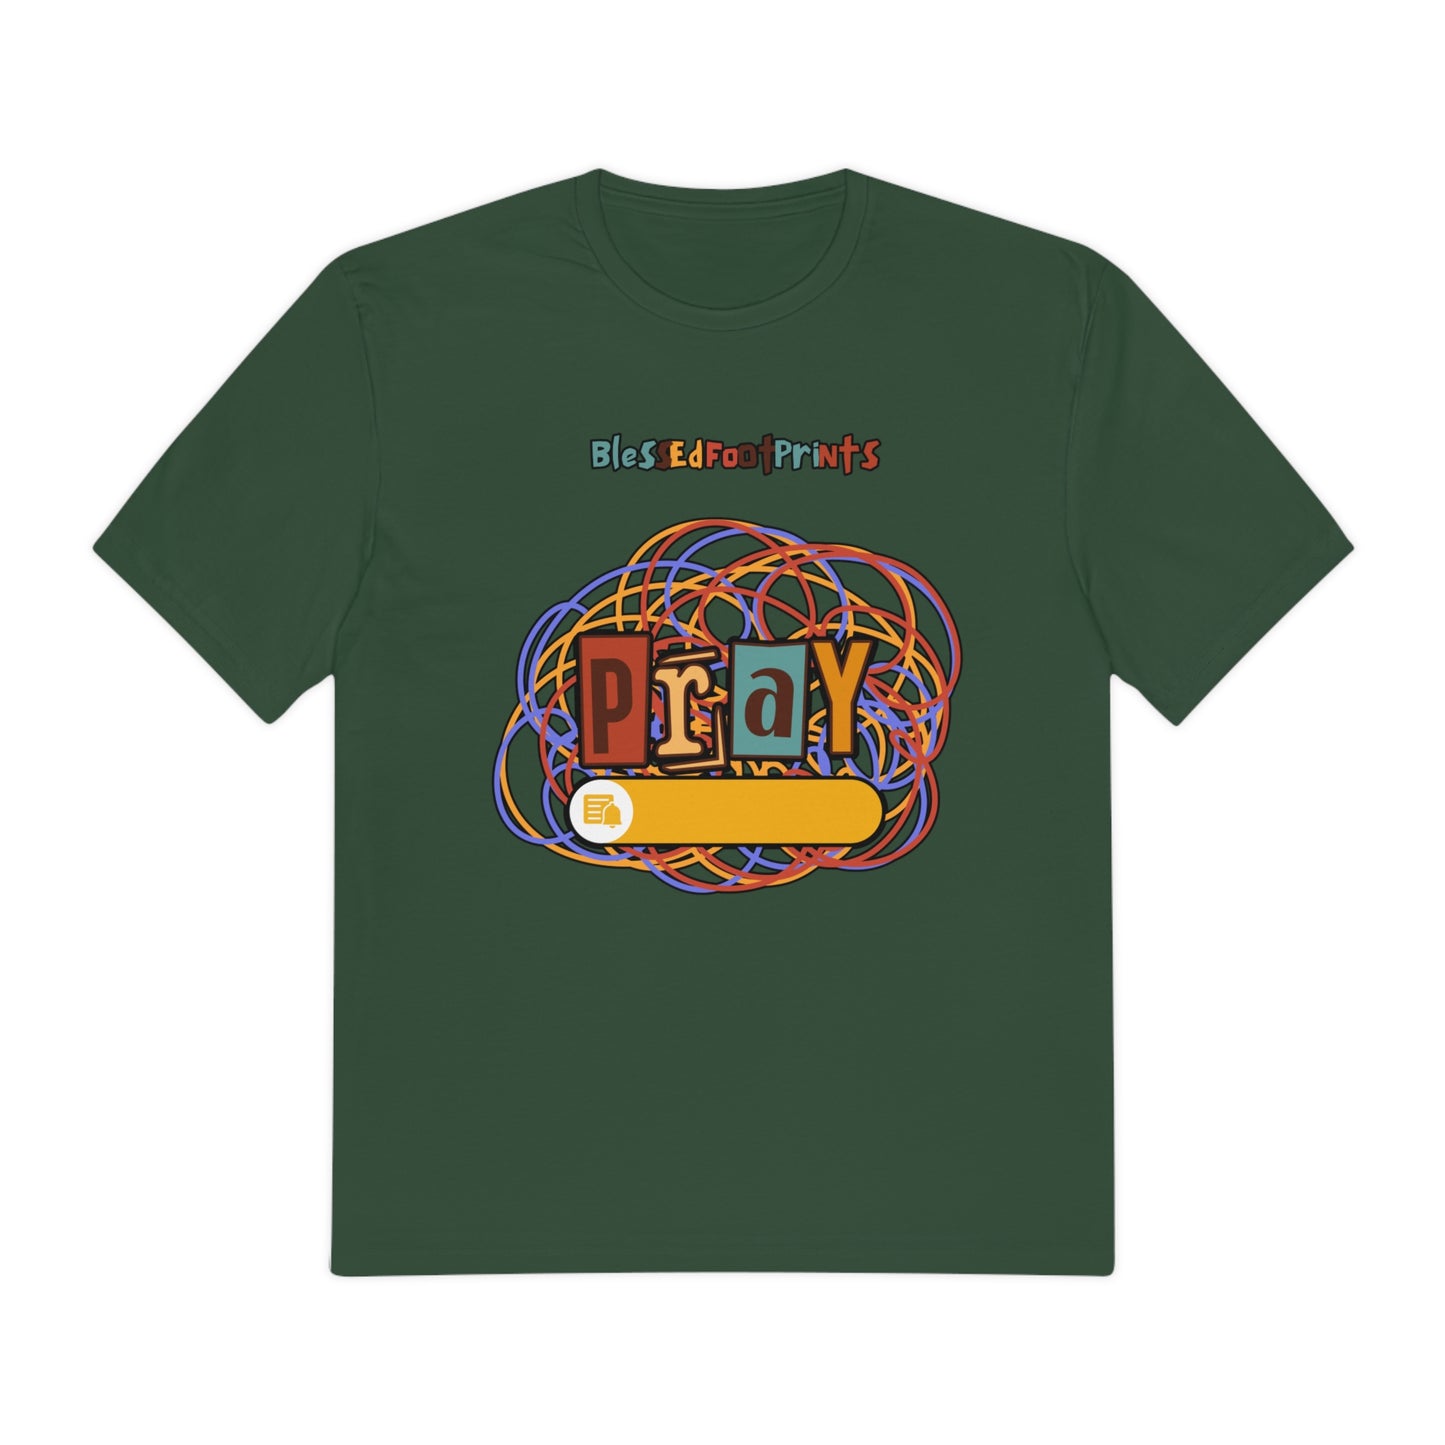 Vibrant "Pray" Tee with Captivating Abstract Background